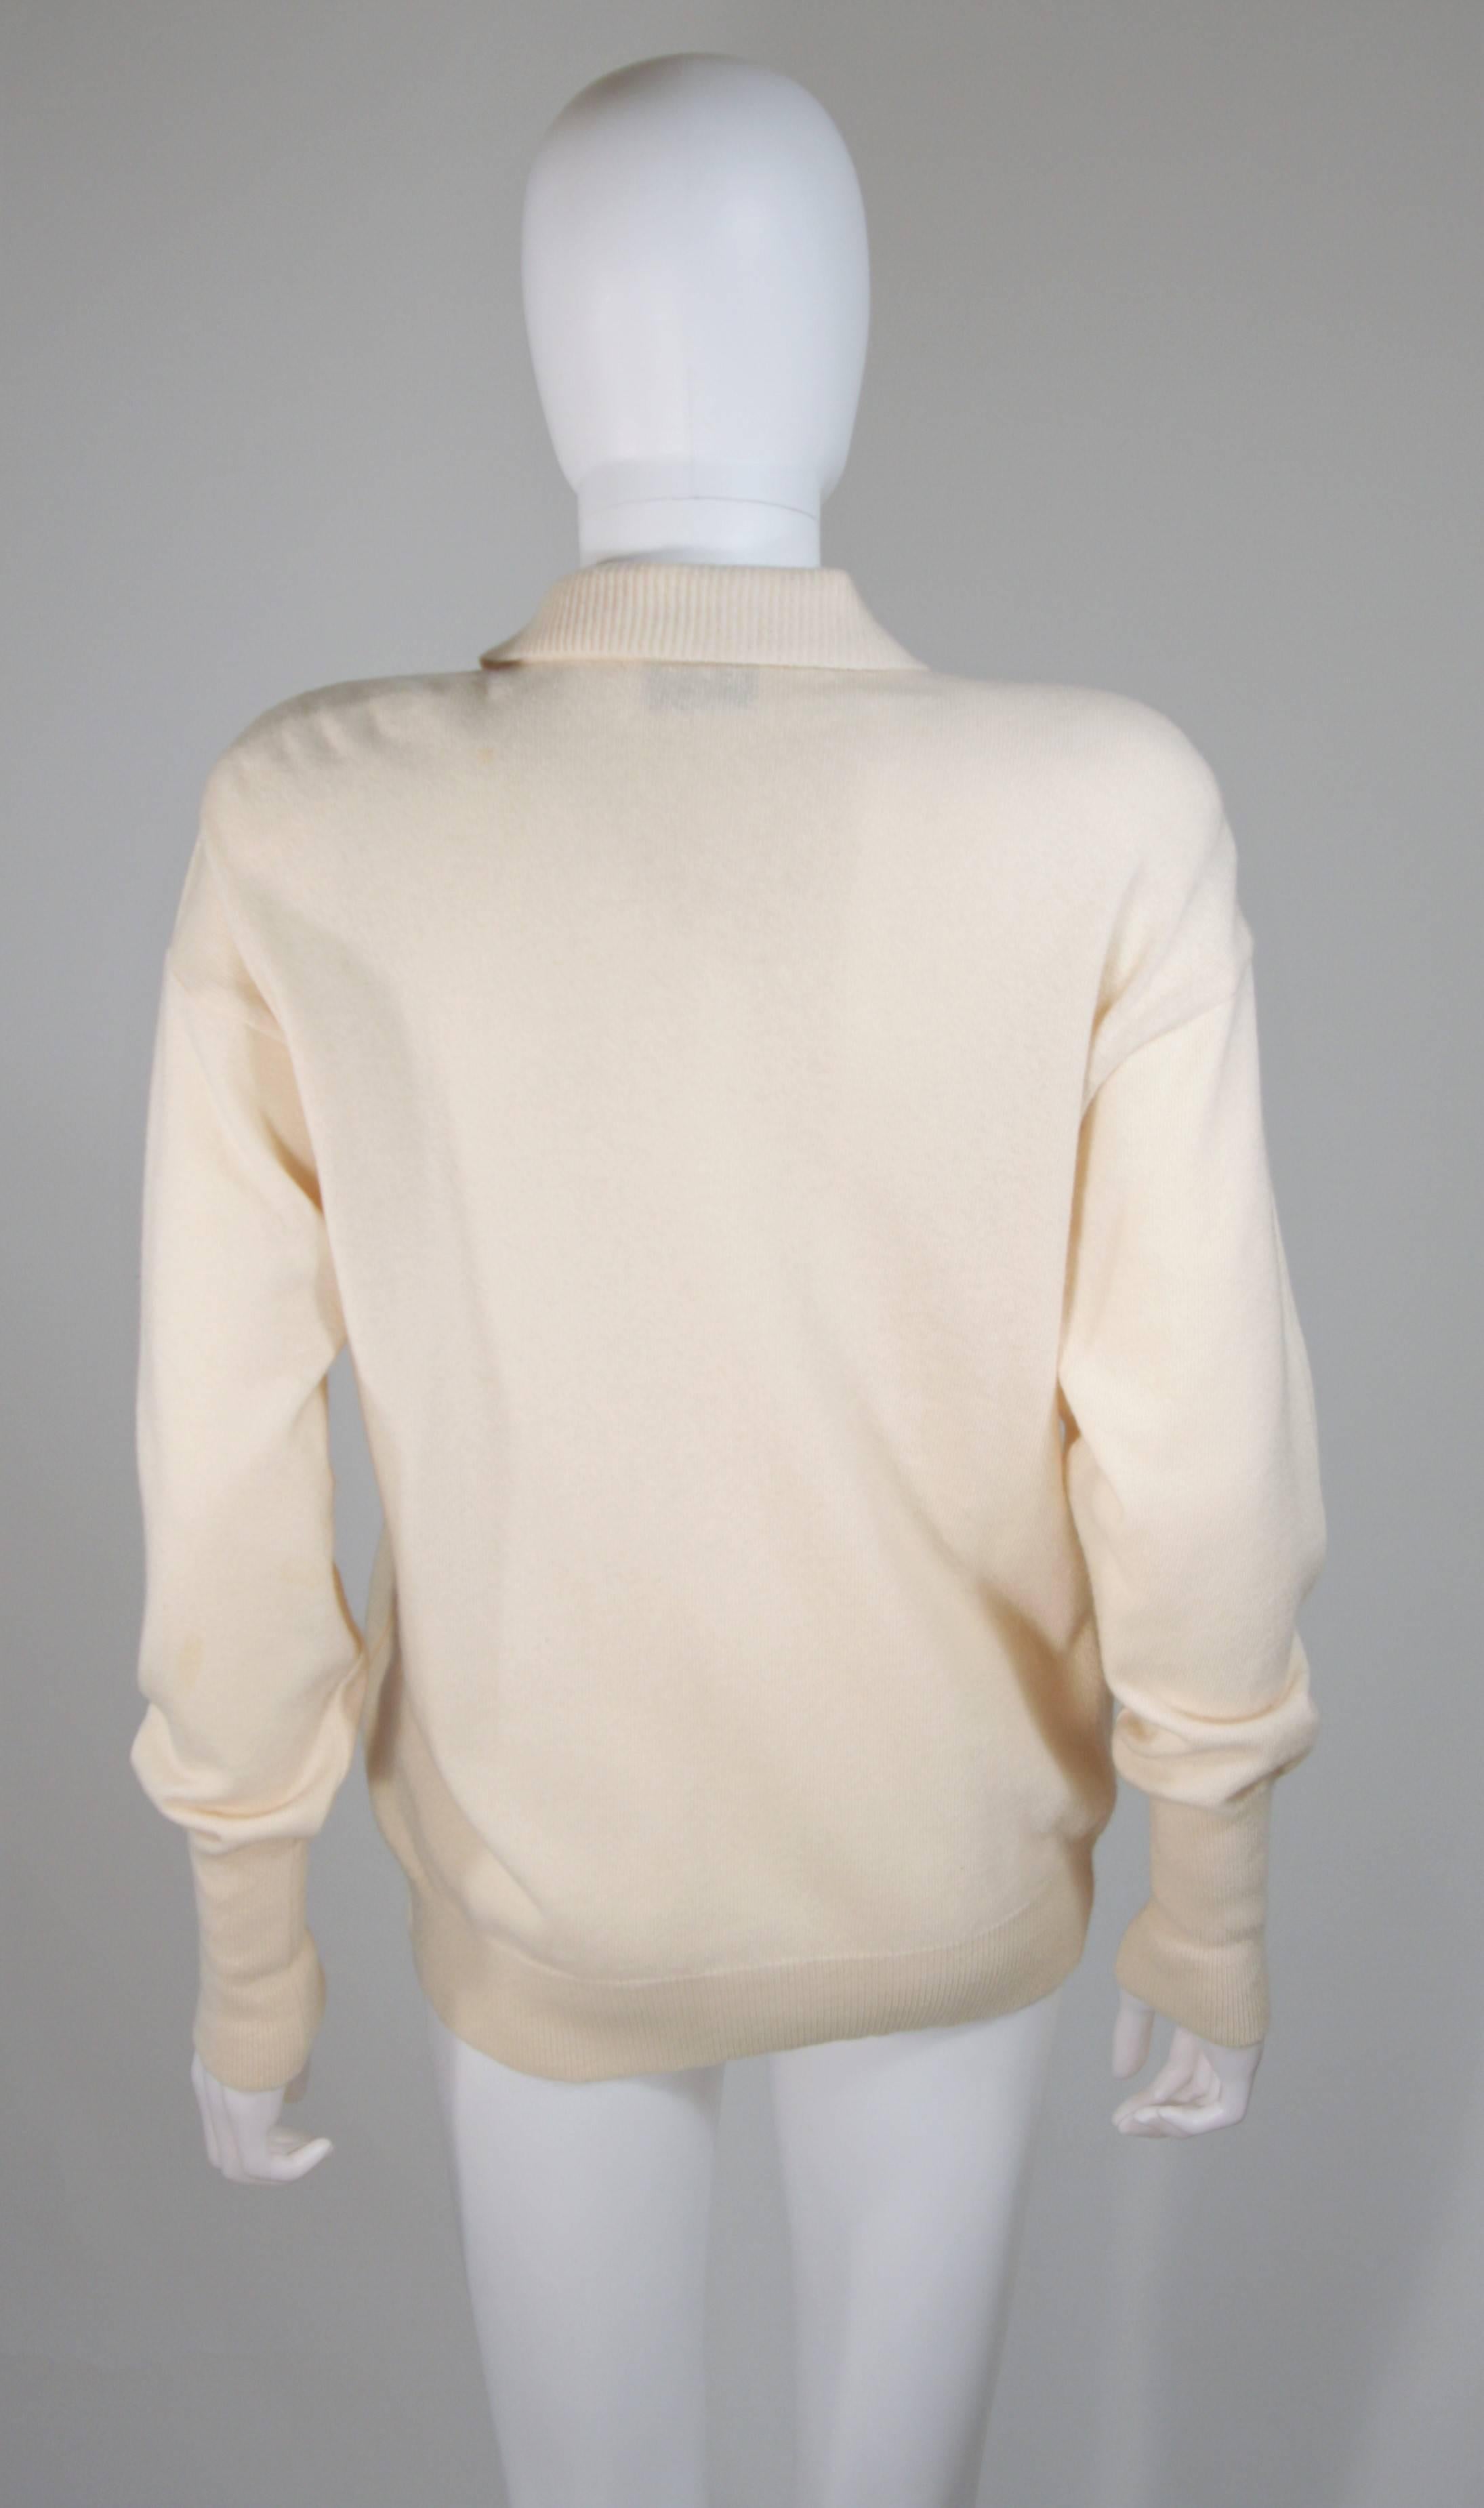 CHANEL Cream Cashmere Pull over Sweater with Gold Coin Buttons Size 38 2